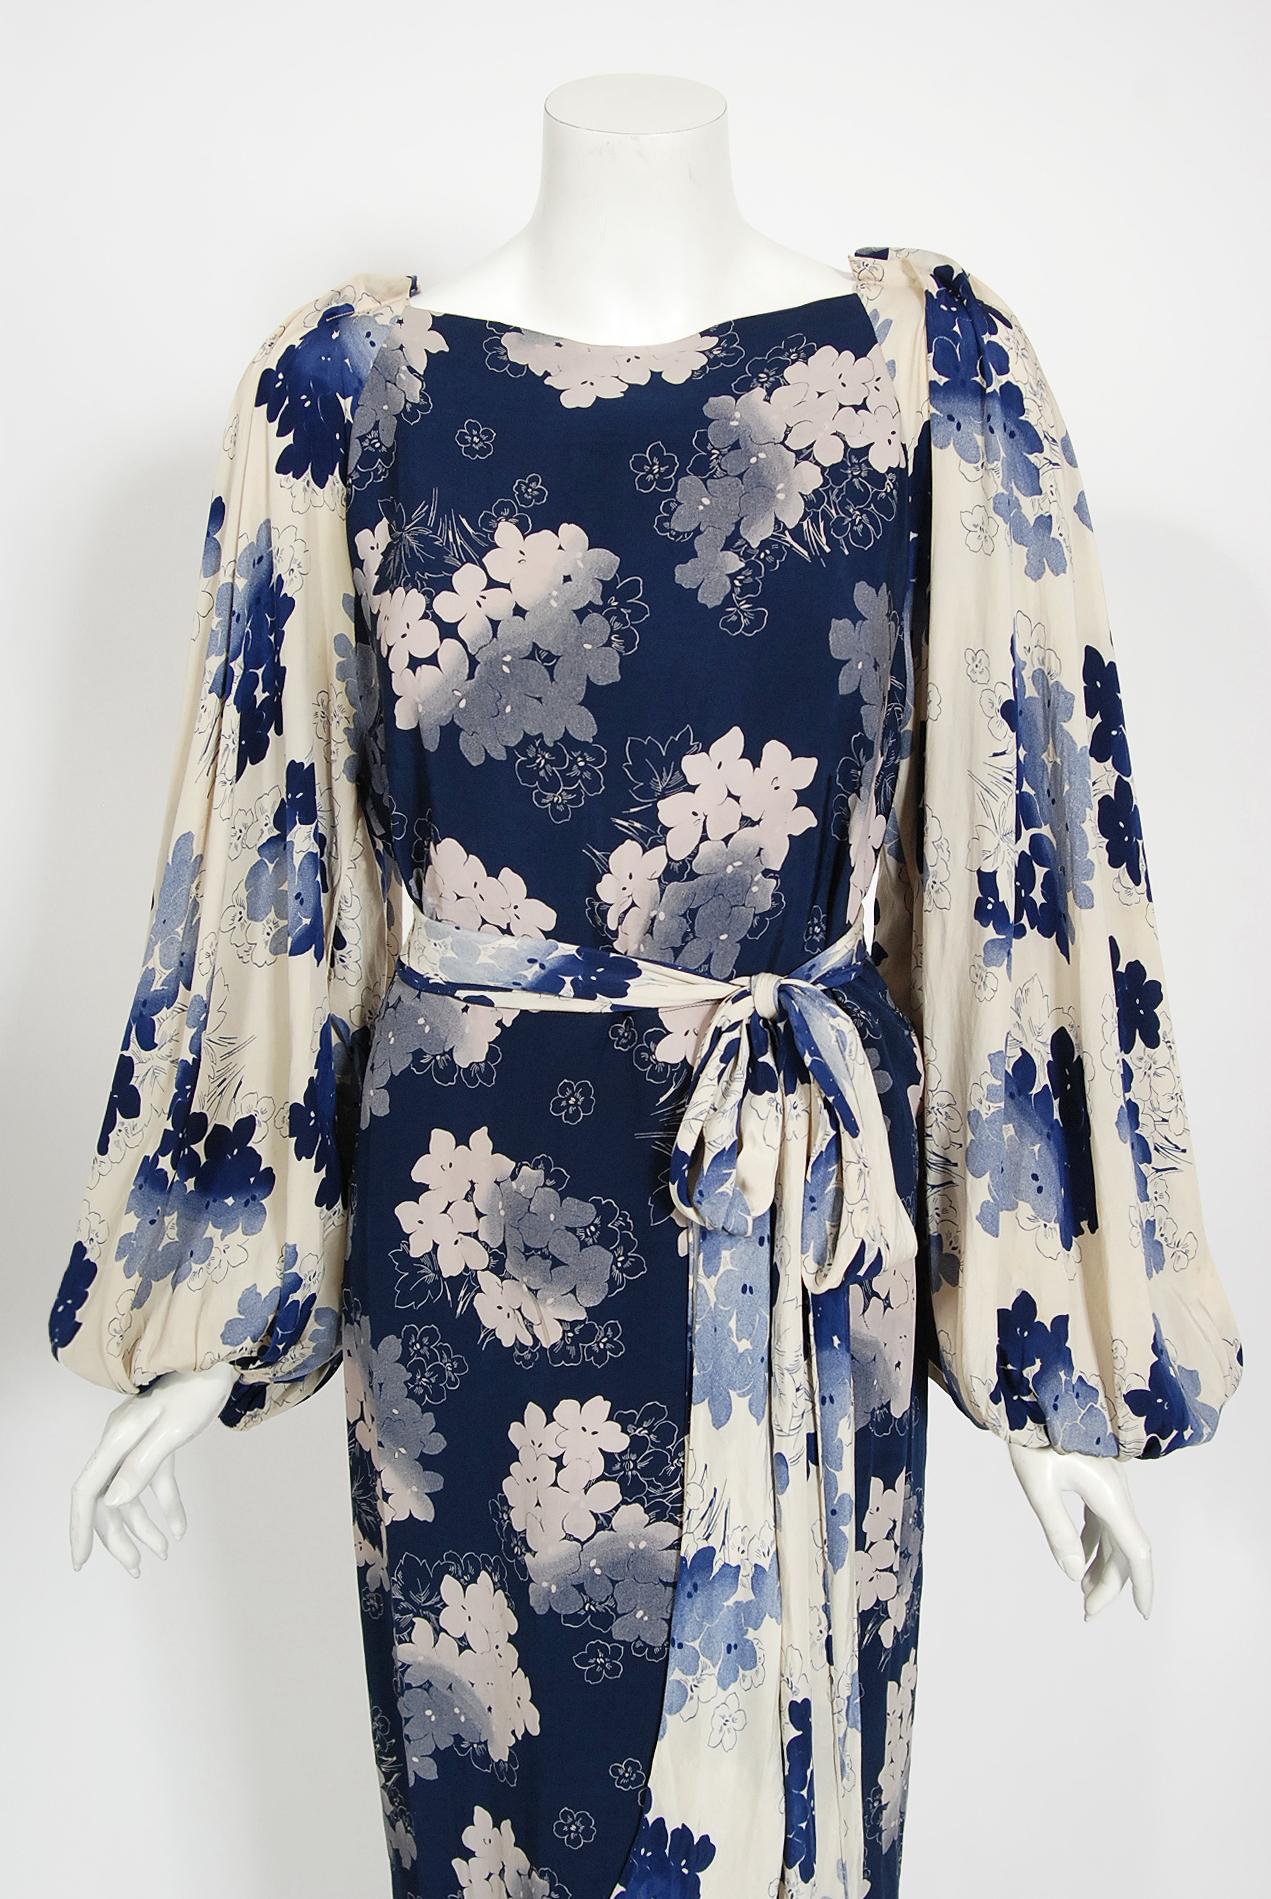 A simply stunning late 1930's Arthur Weiss designer dress fashioned in a beautiful gradient blue and ivory floral silk. The print alone is so striking! Arthur Weiss has been noted as being the largest maker of dresses in the United States during